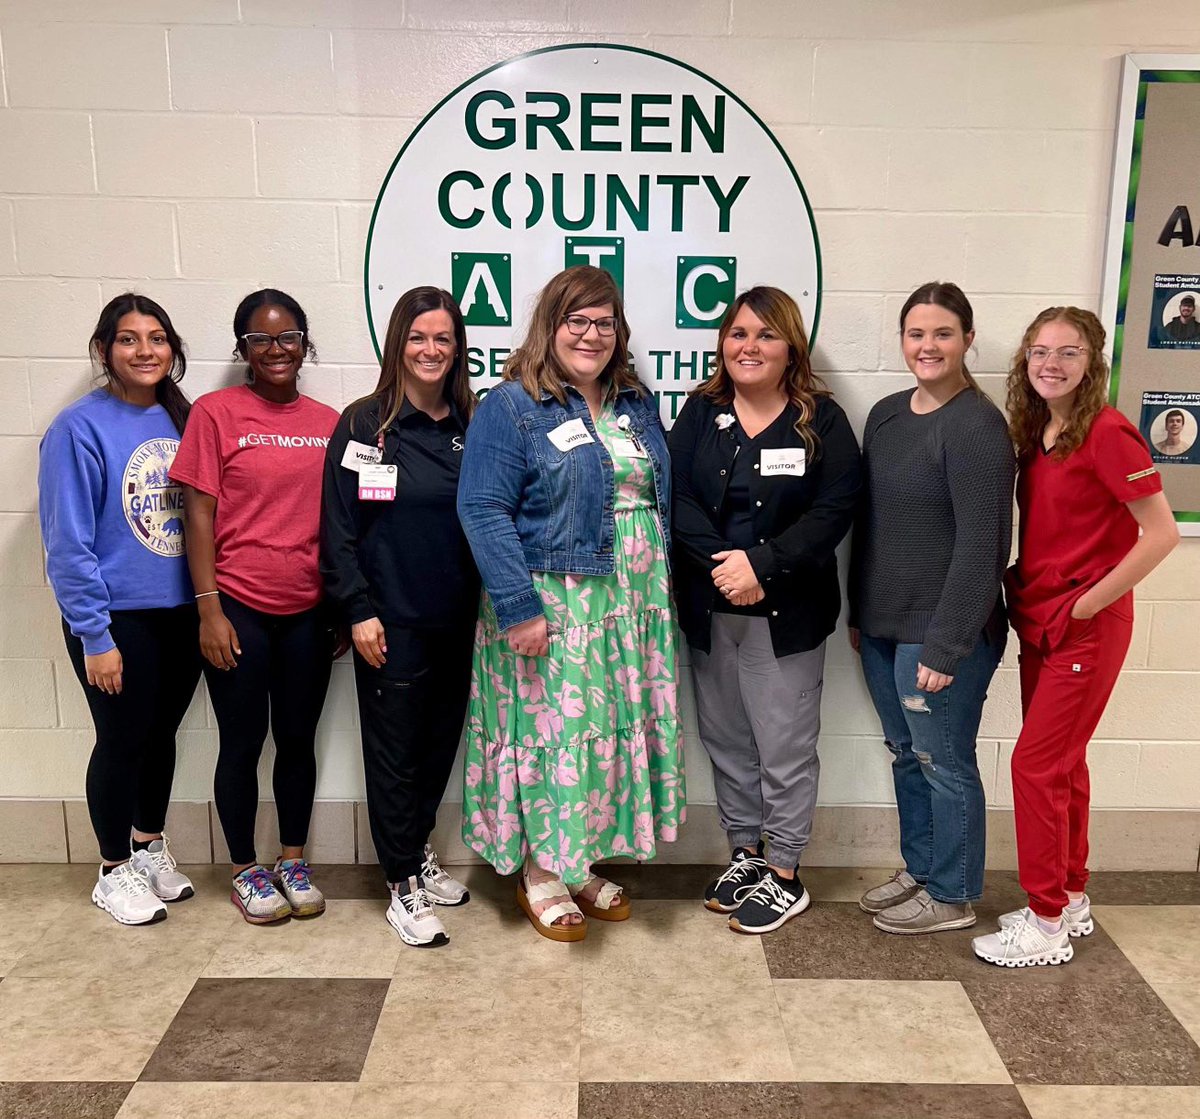 Ms. Bagby’s Principles of Health Science students have been participating in mock interviews this week! We appreciate Laura Hodges, Jennifer Thompson, and Megan Curry for being our interviewers! They are pictured here with some of the students. 

#GCATC #TechSuccess